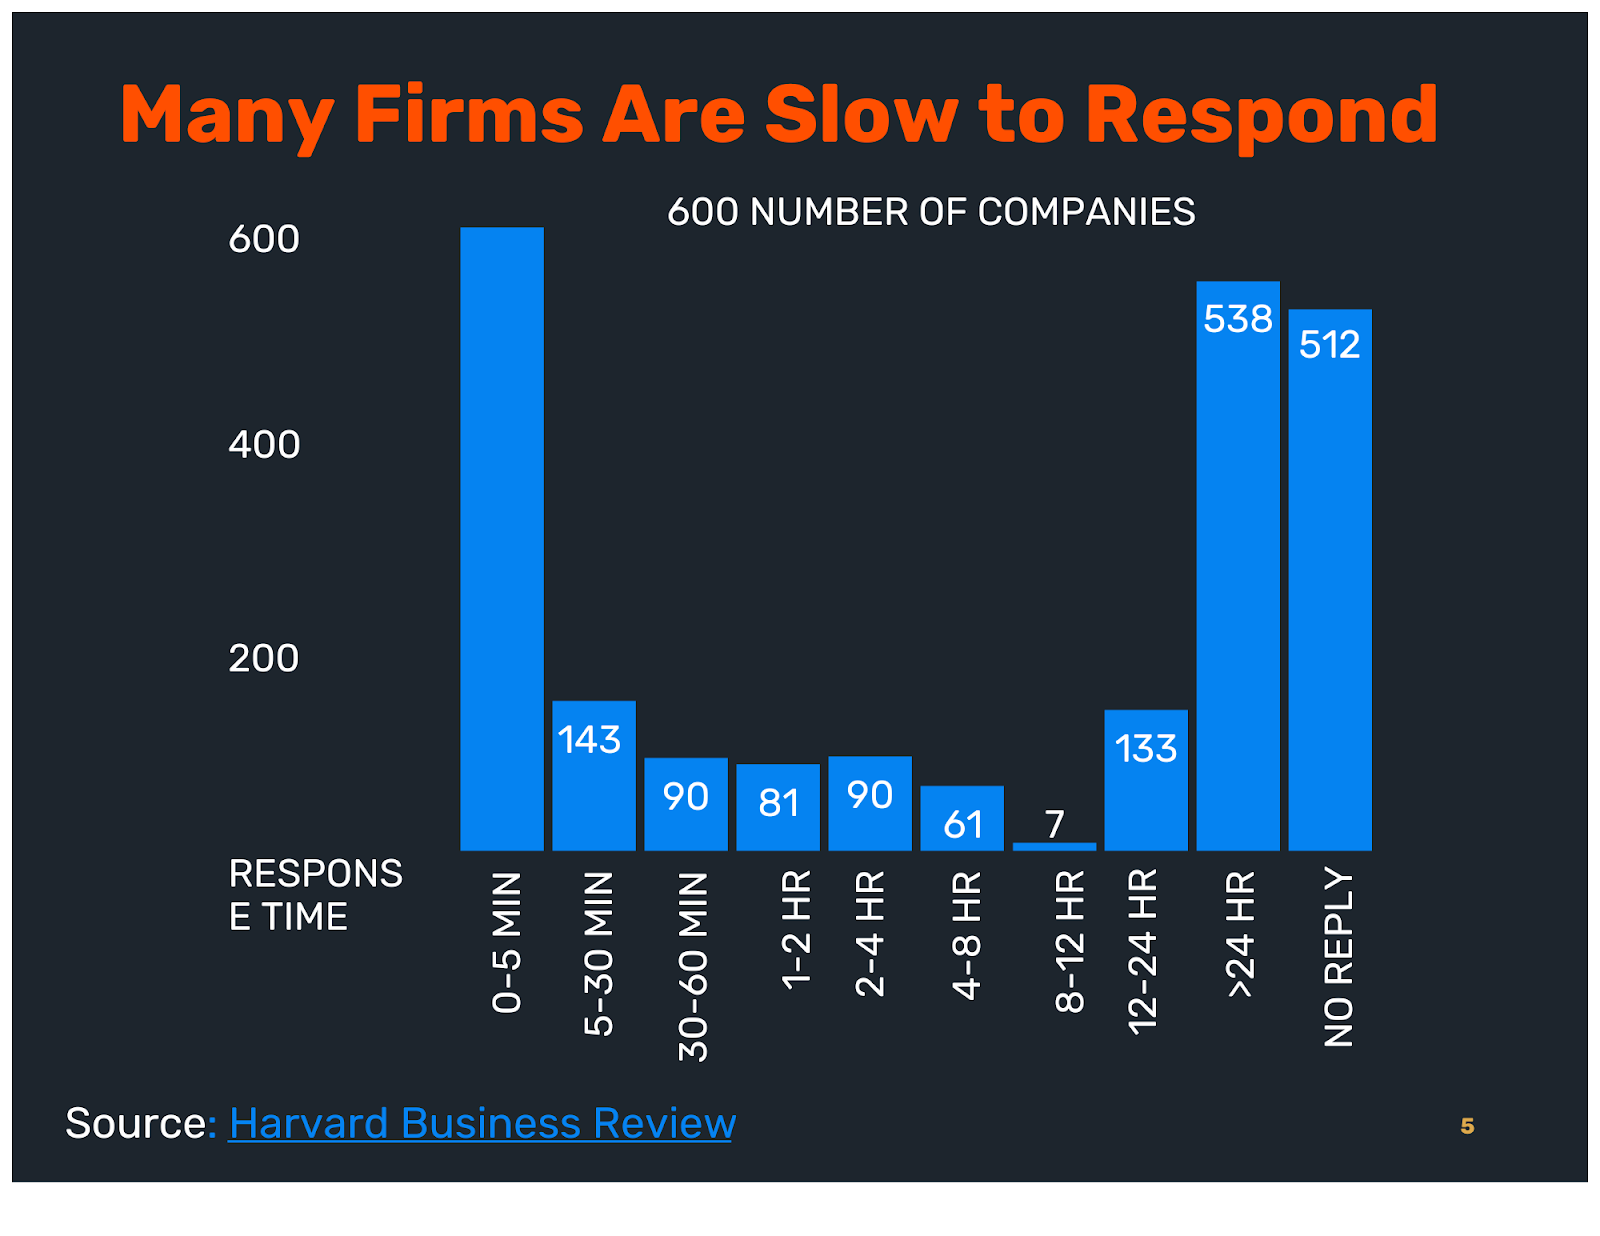 A study in the Harvard Business Review showed that only 37% of businesses responded within an hour. 
